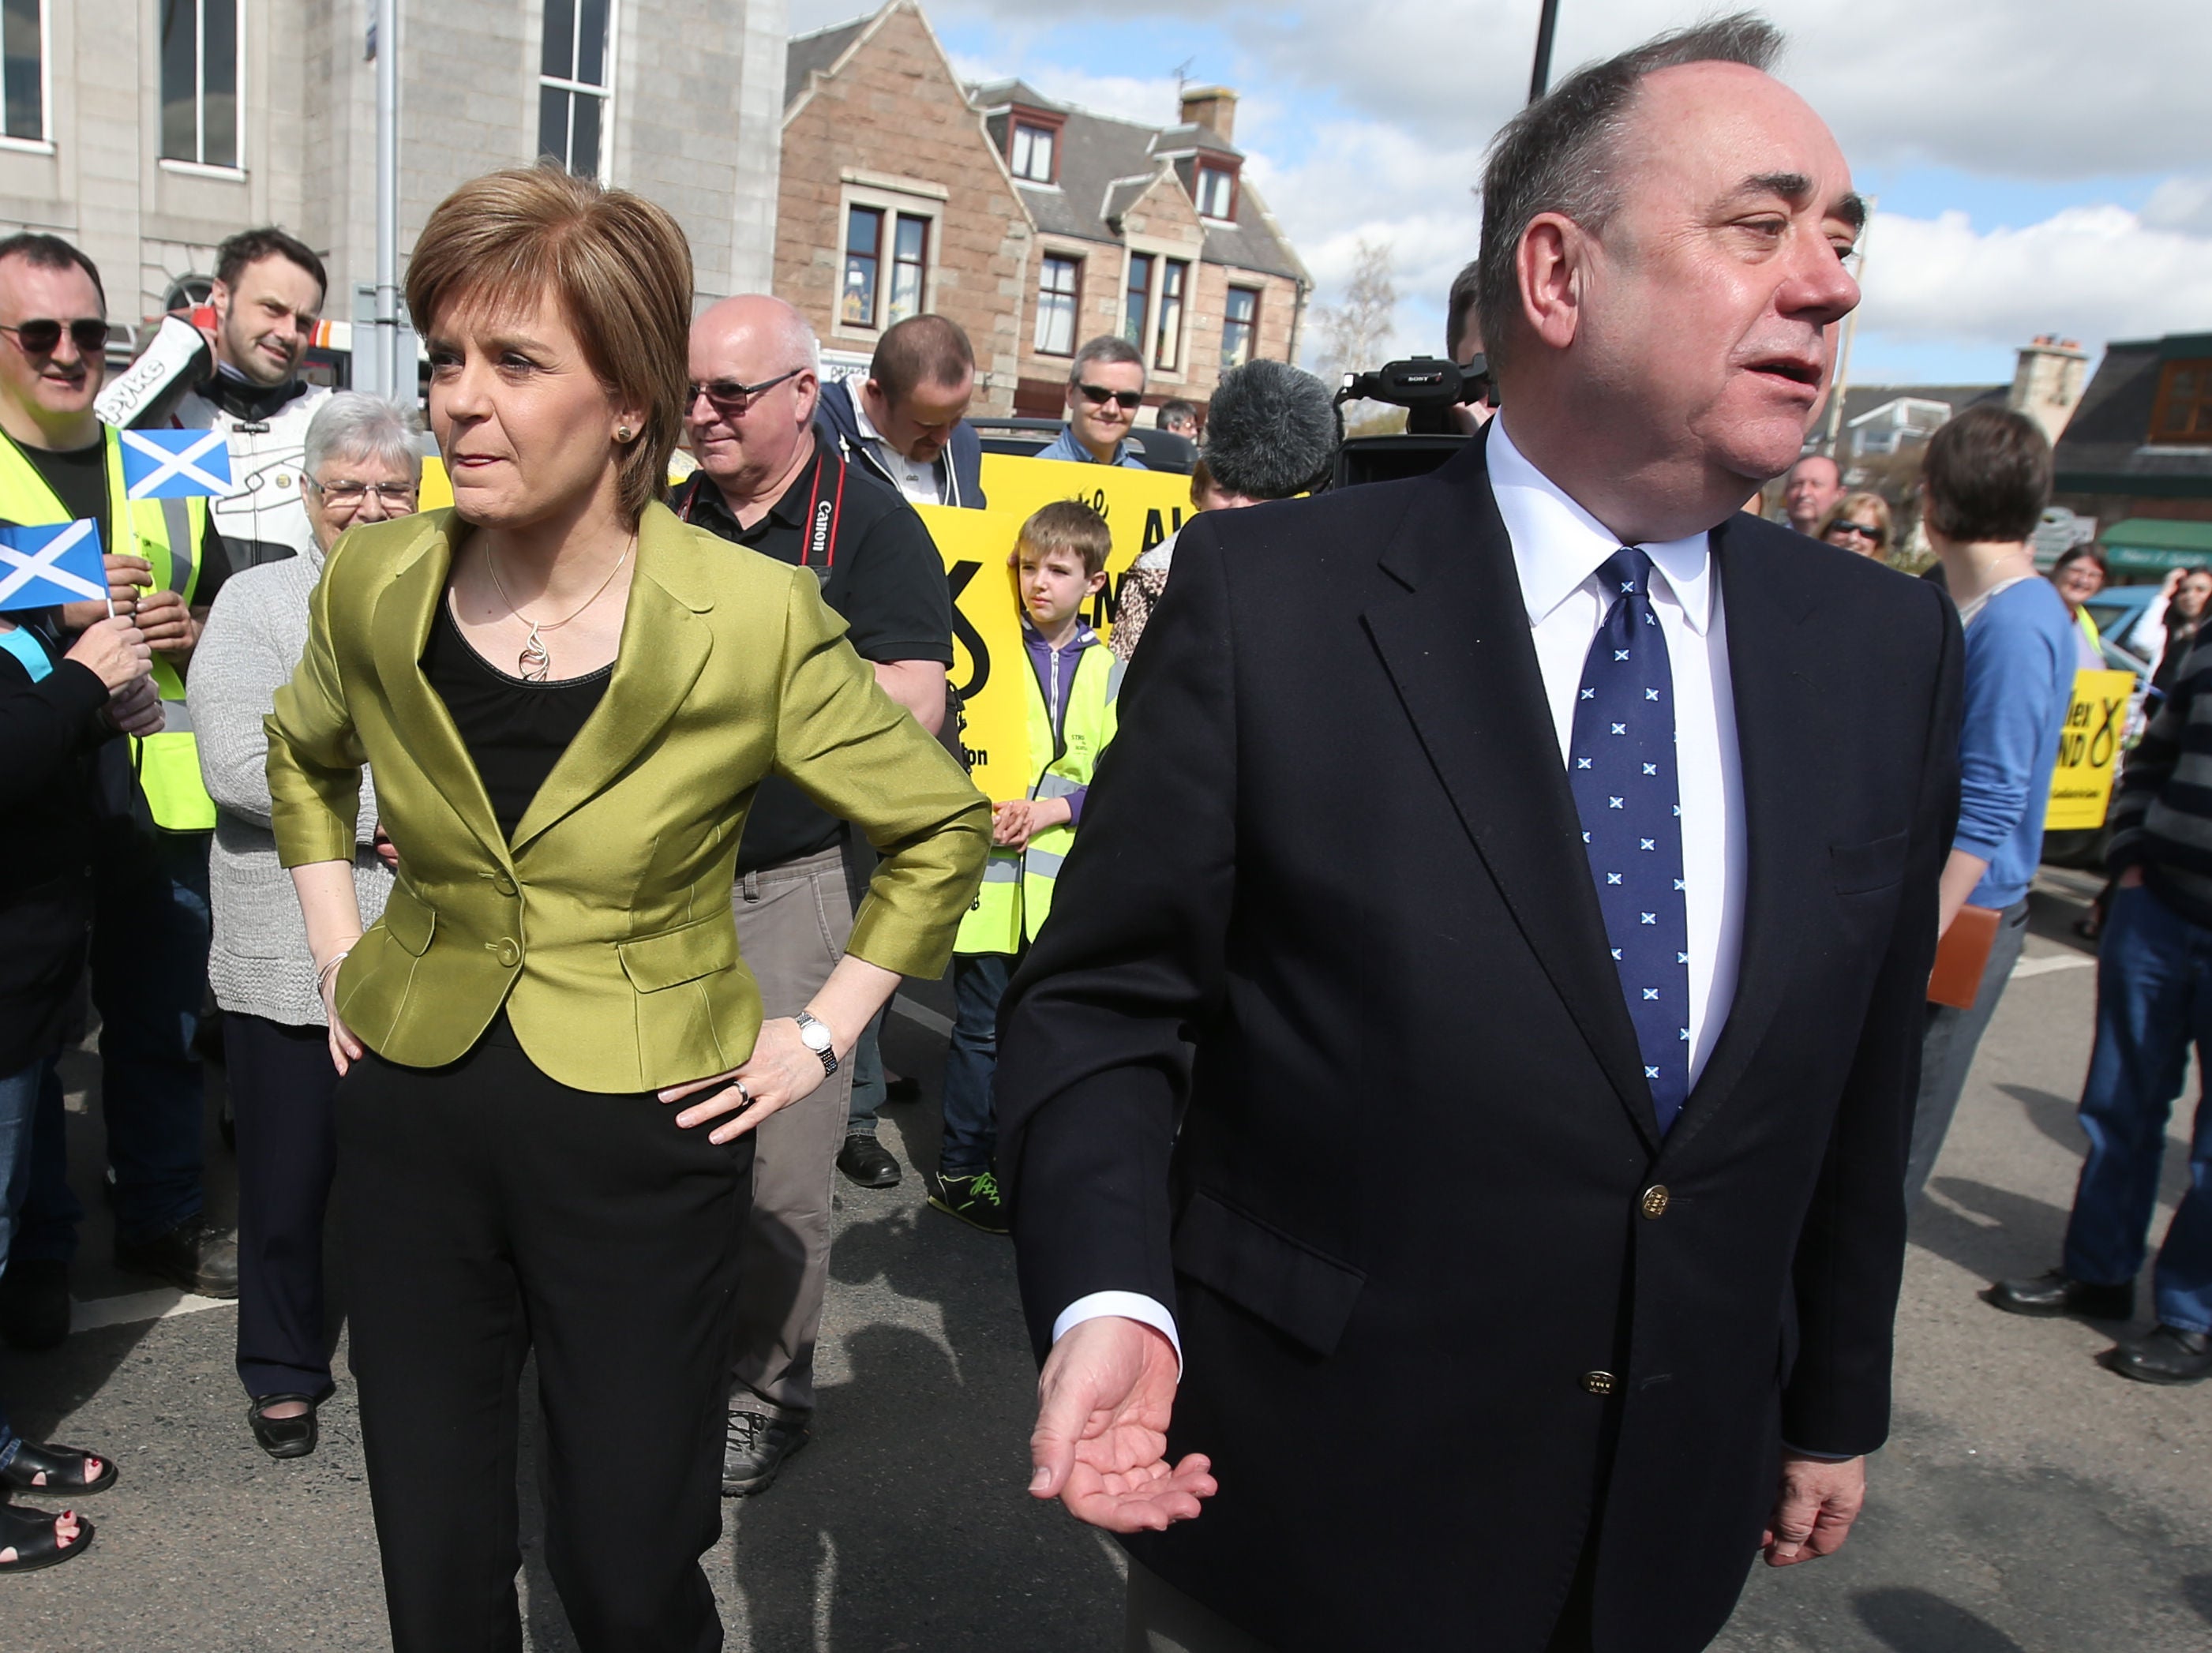 Sturgeon and Salmond on campaign trail in 2015